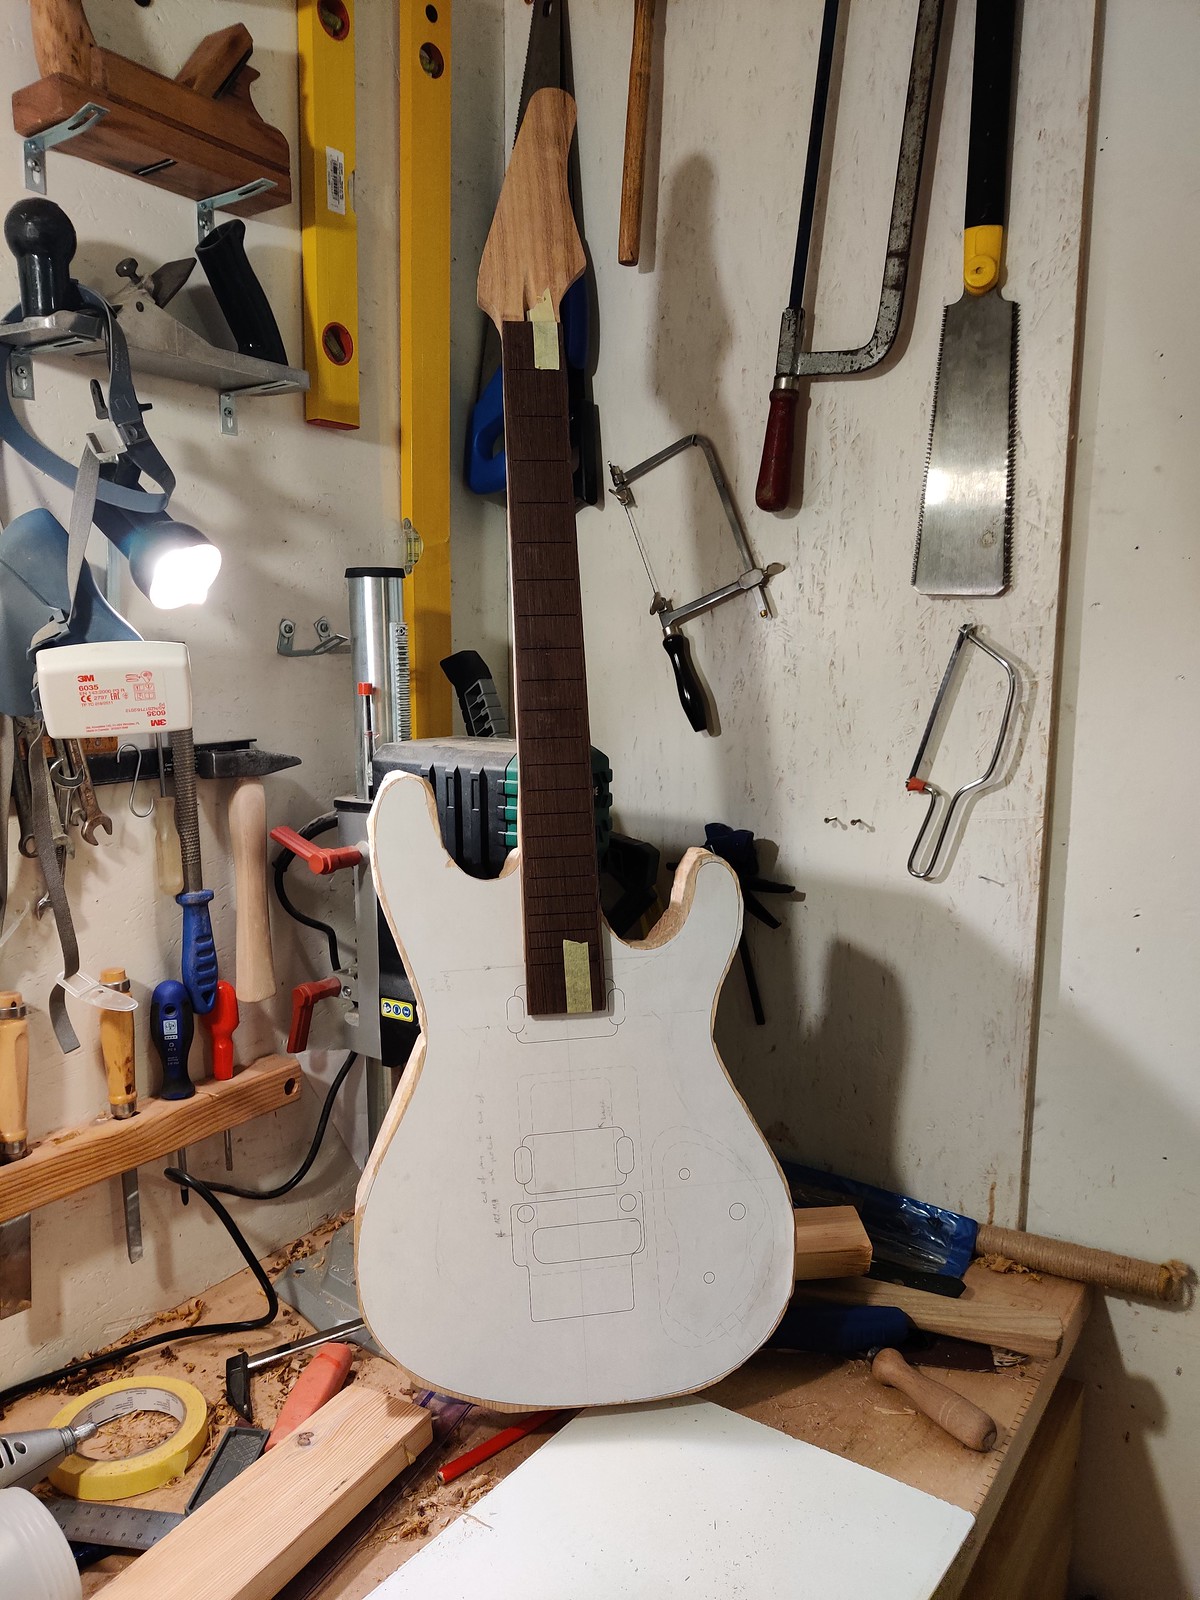 Entire guitar project assembled temporarily